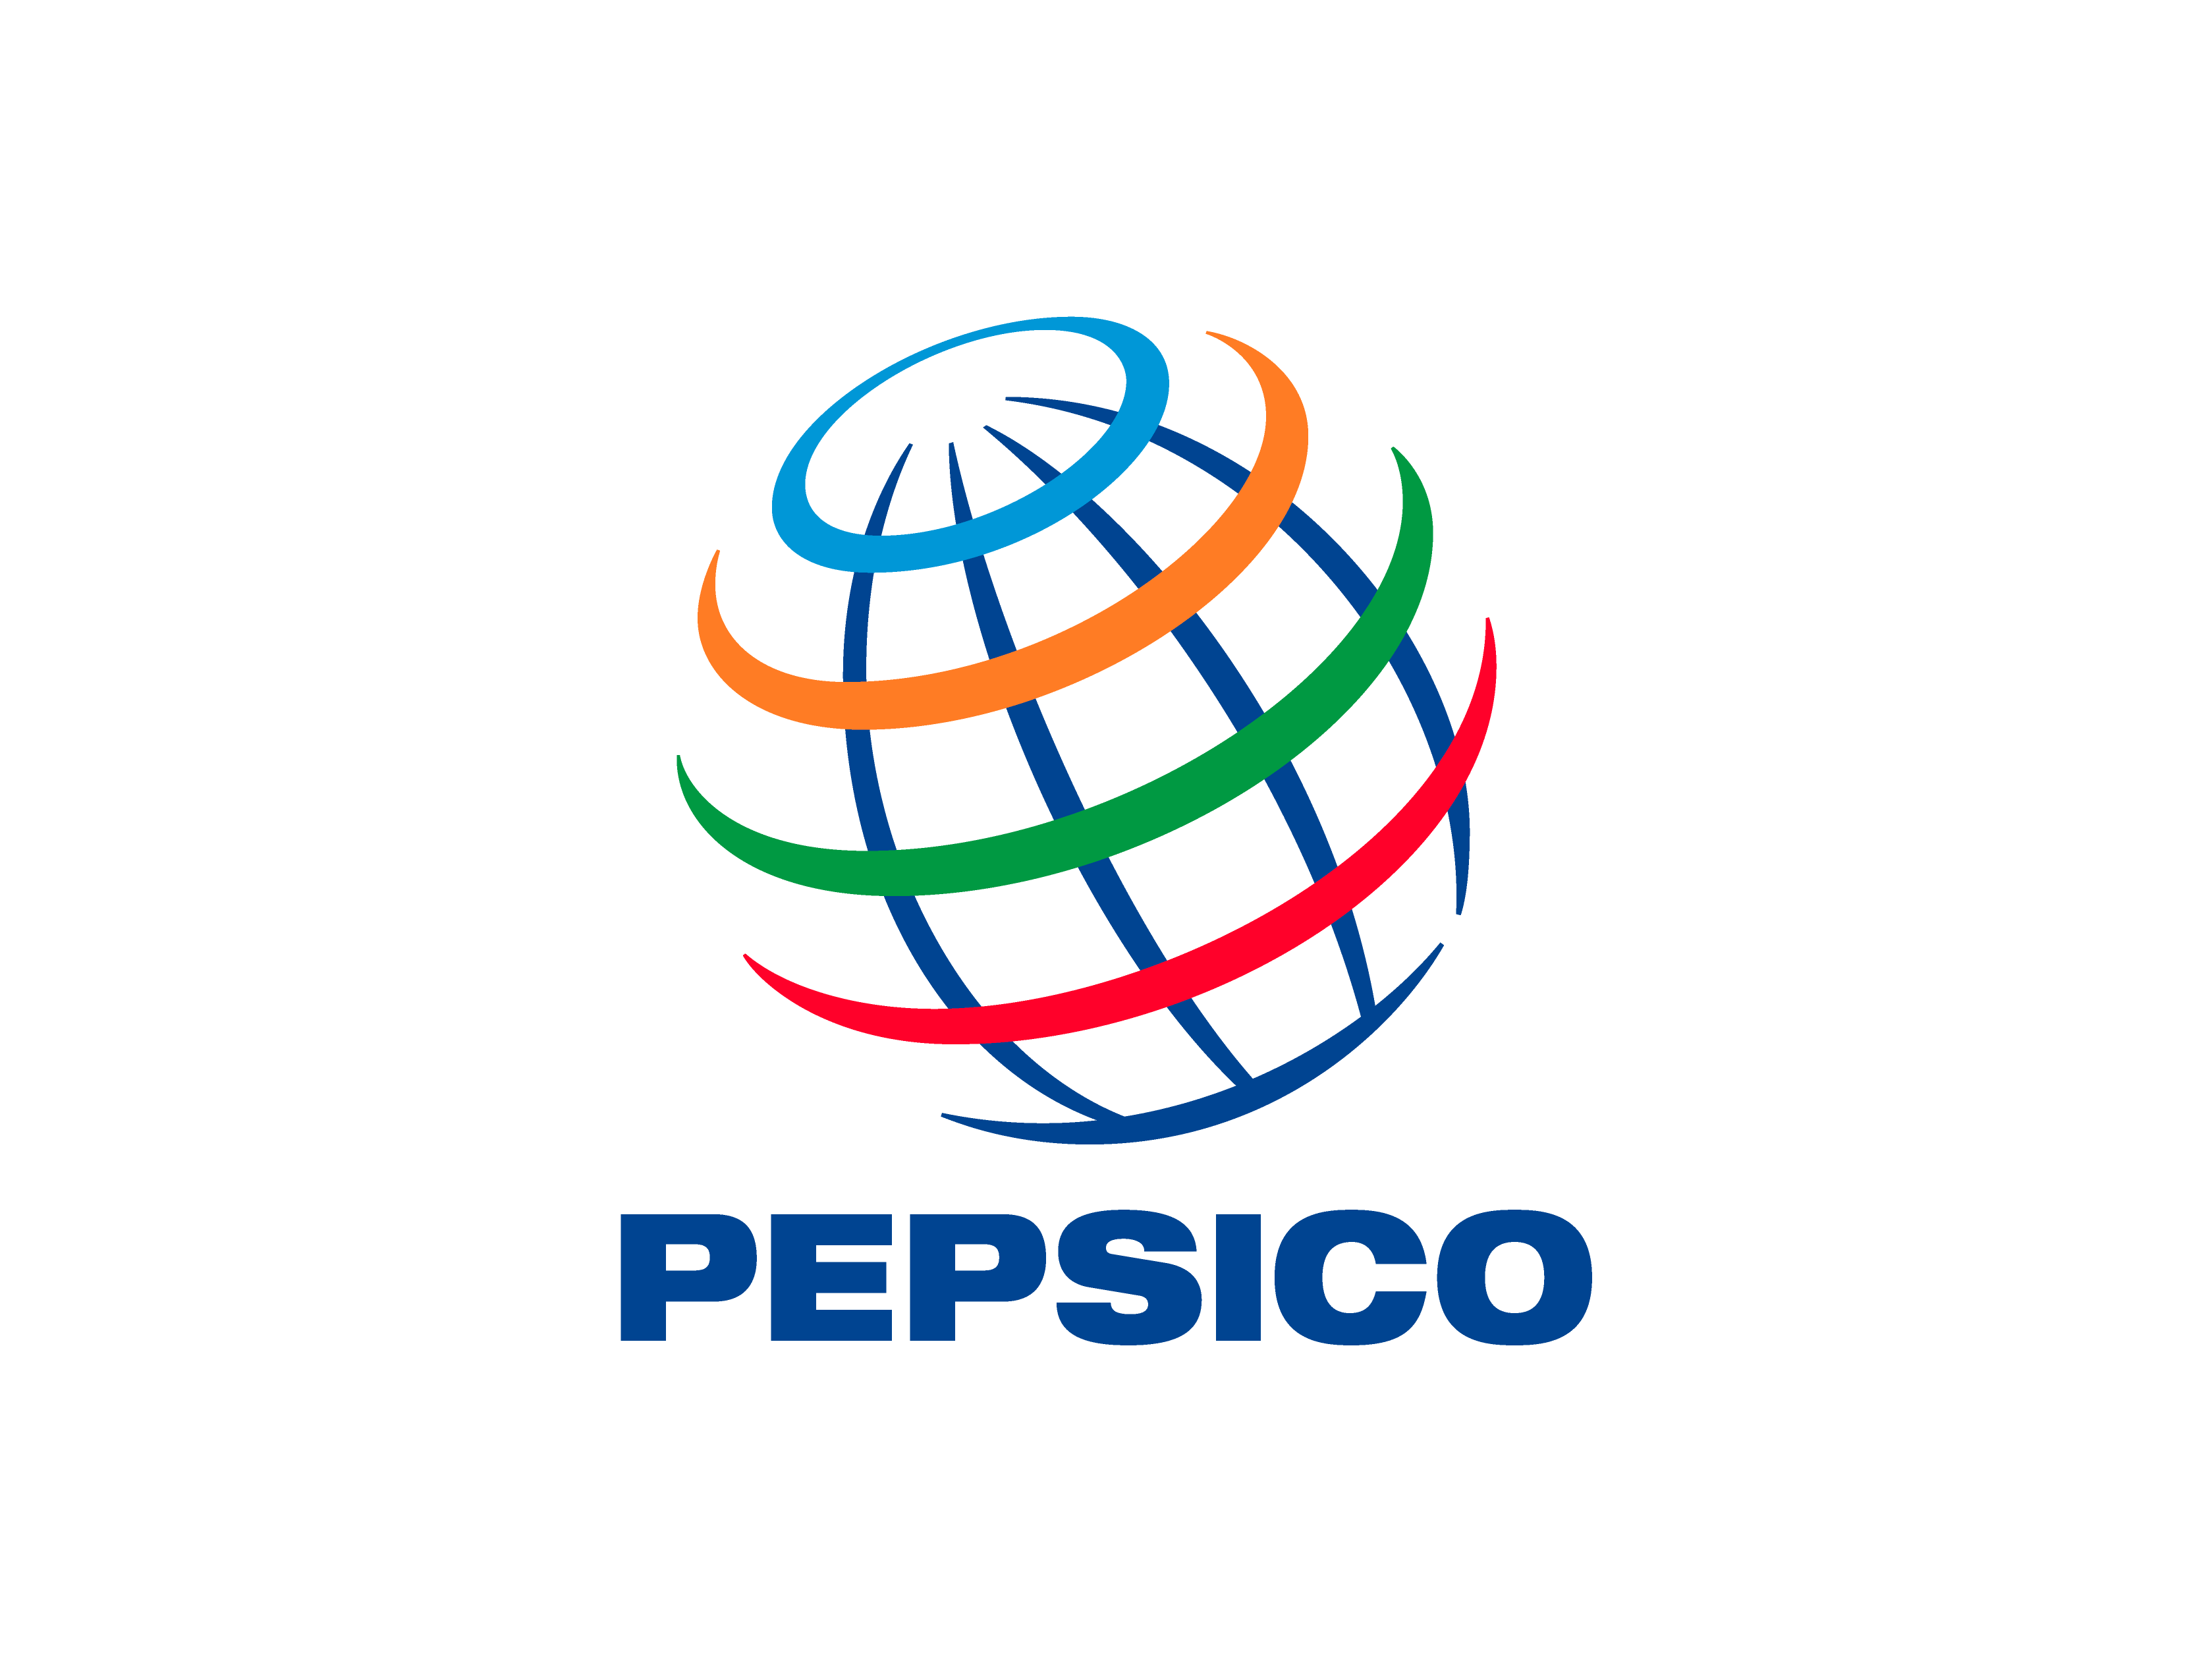 Who owns PepsiCo? - Who Owns This